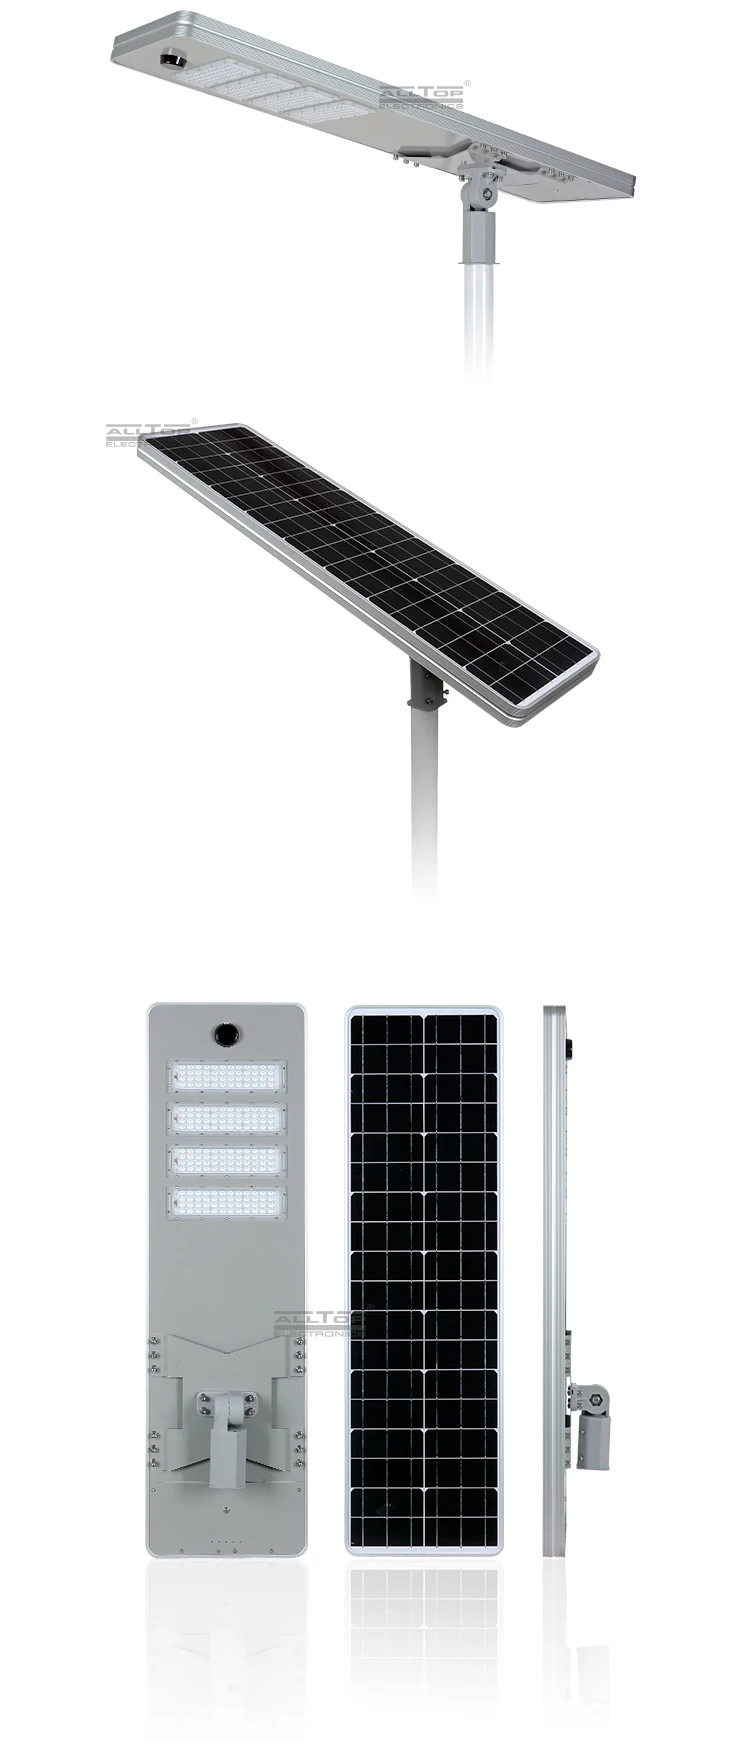 ALLTOP High quality outdoor lighting solar charging ip65 smd 50w 100w 150w 200w integrated all in one led solar street light